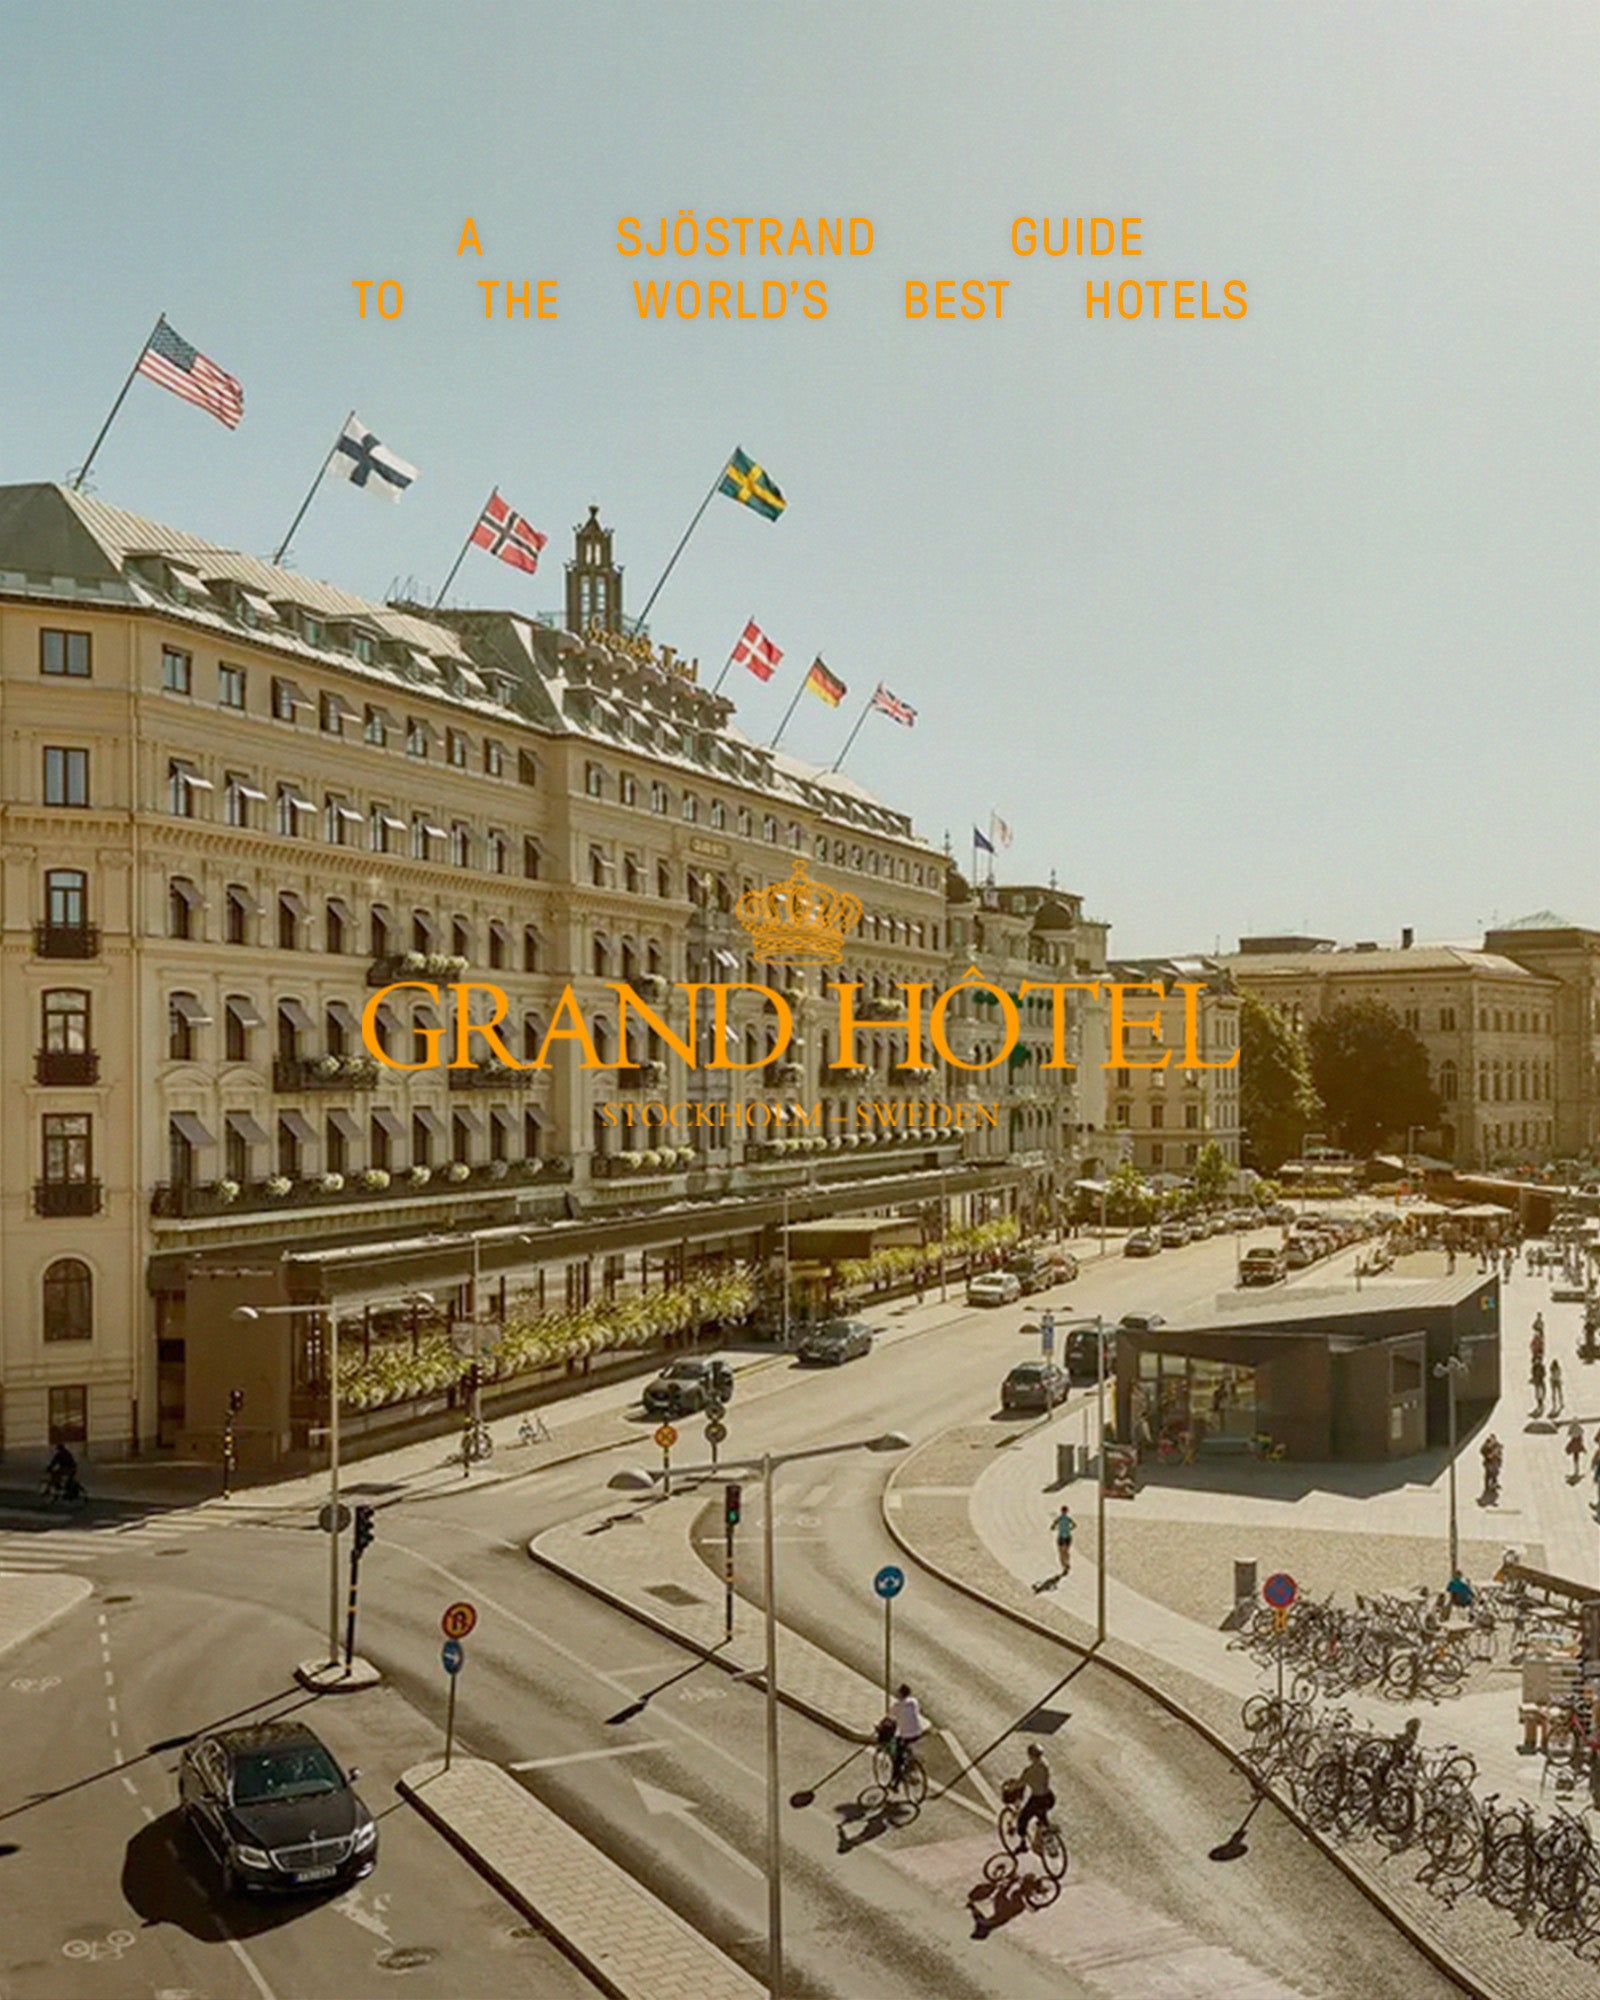 The Grand Hotel in Stockholm card image